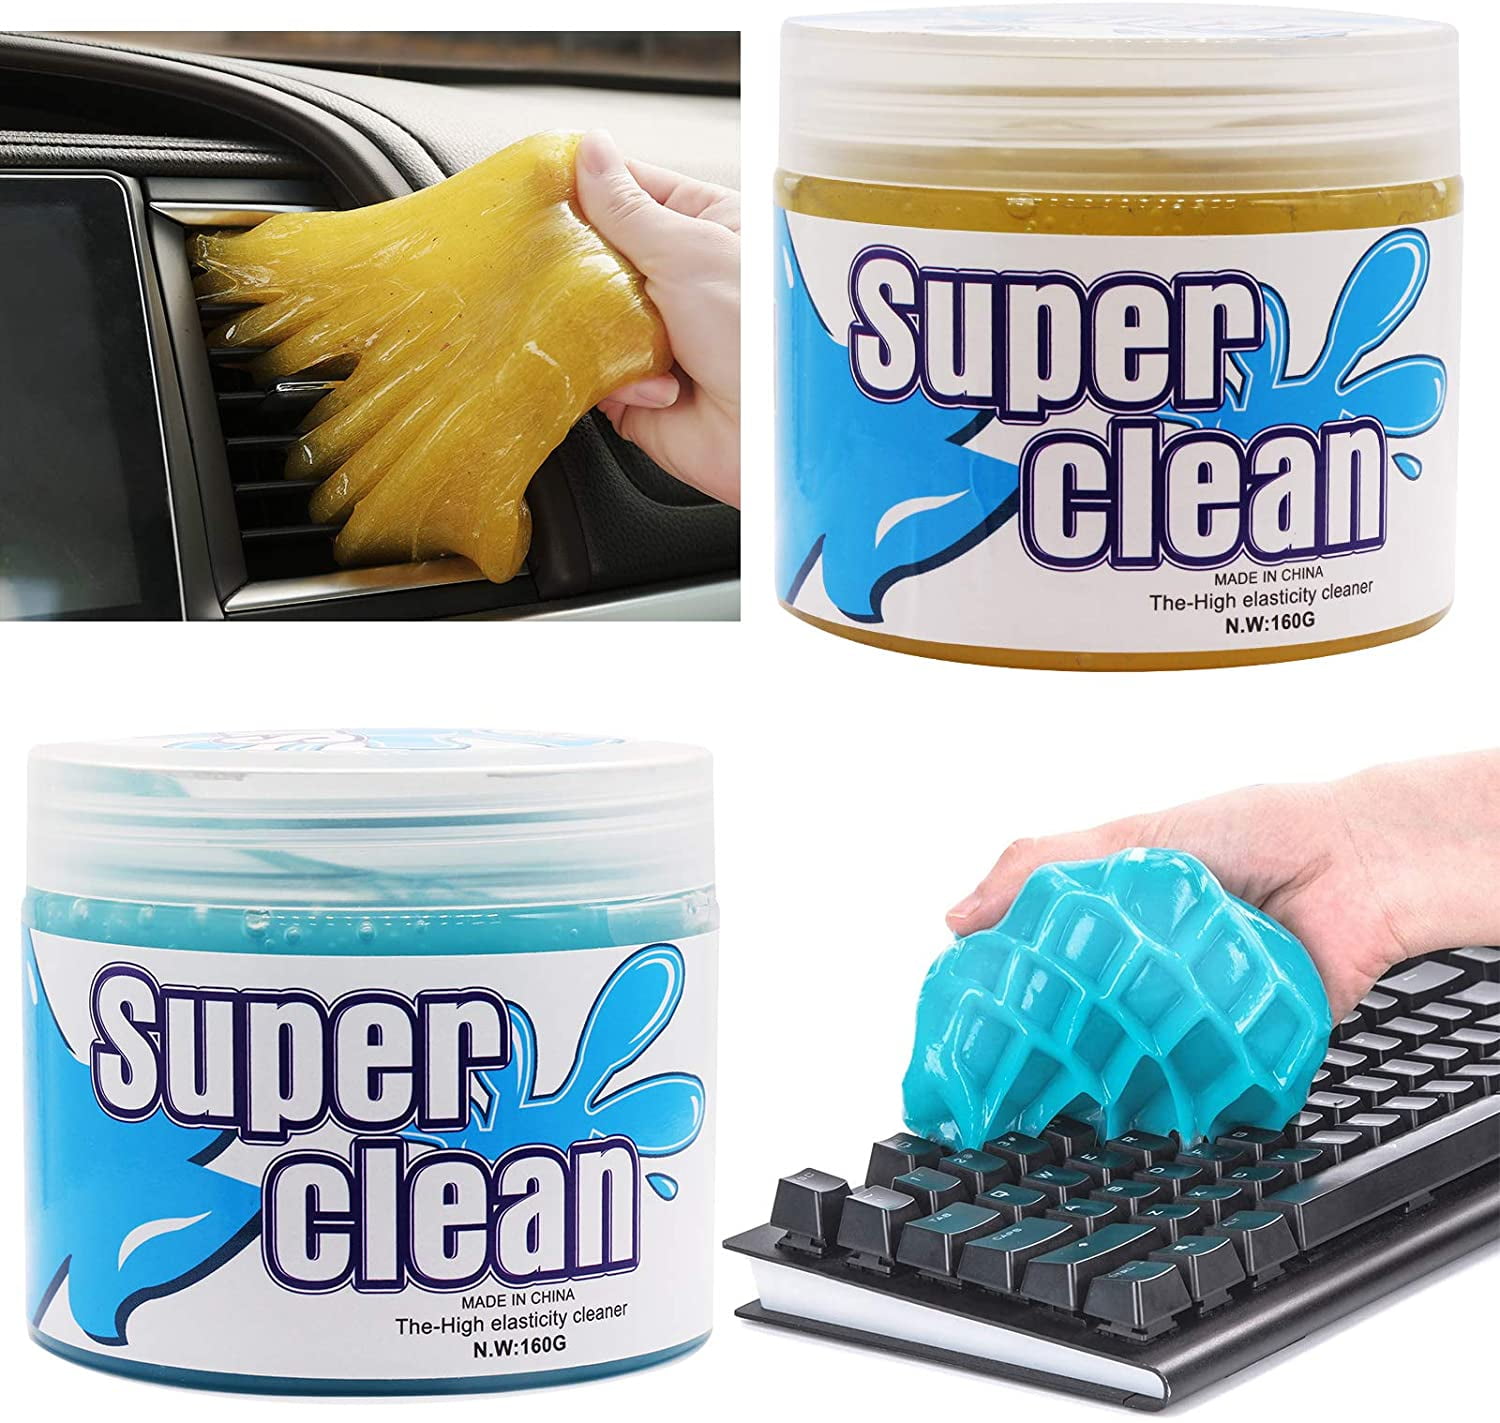 Dust Cleaning Gel,Super Clean Degreaser 2 Pack Keyboard Ceaner Universal Reusable Magic Dust Cleaning Mud for PC Tablet Laptop Keyboard Automobile Vents Printers Fan Parts. 